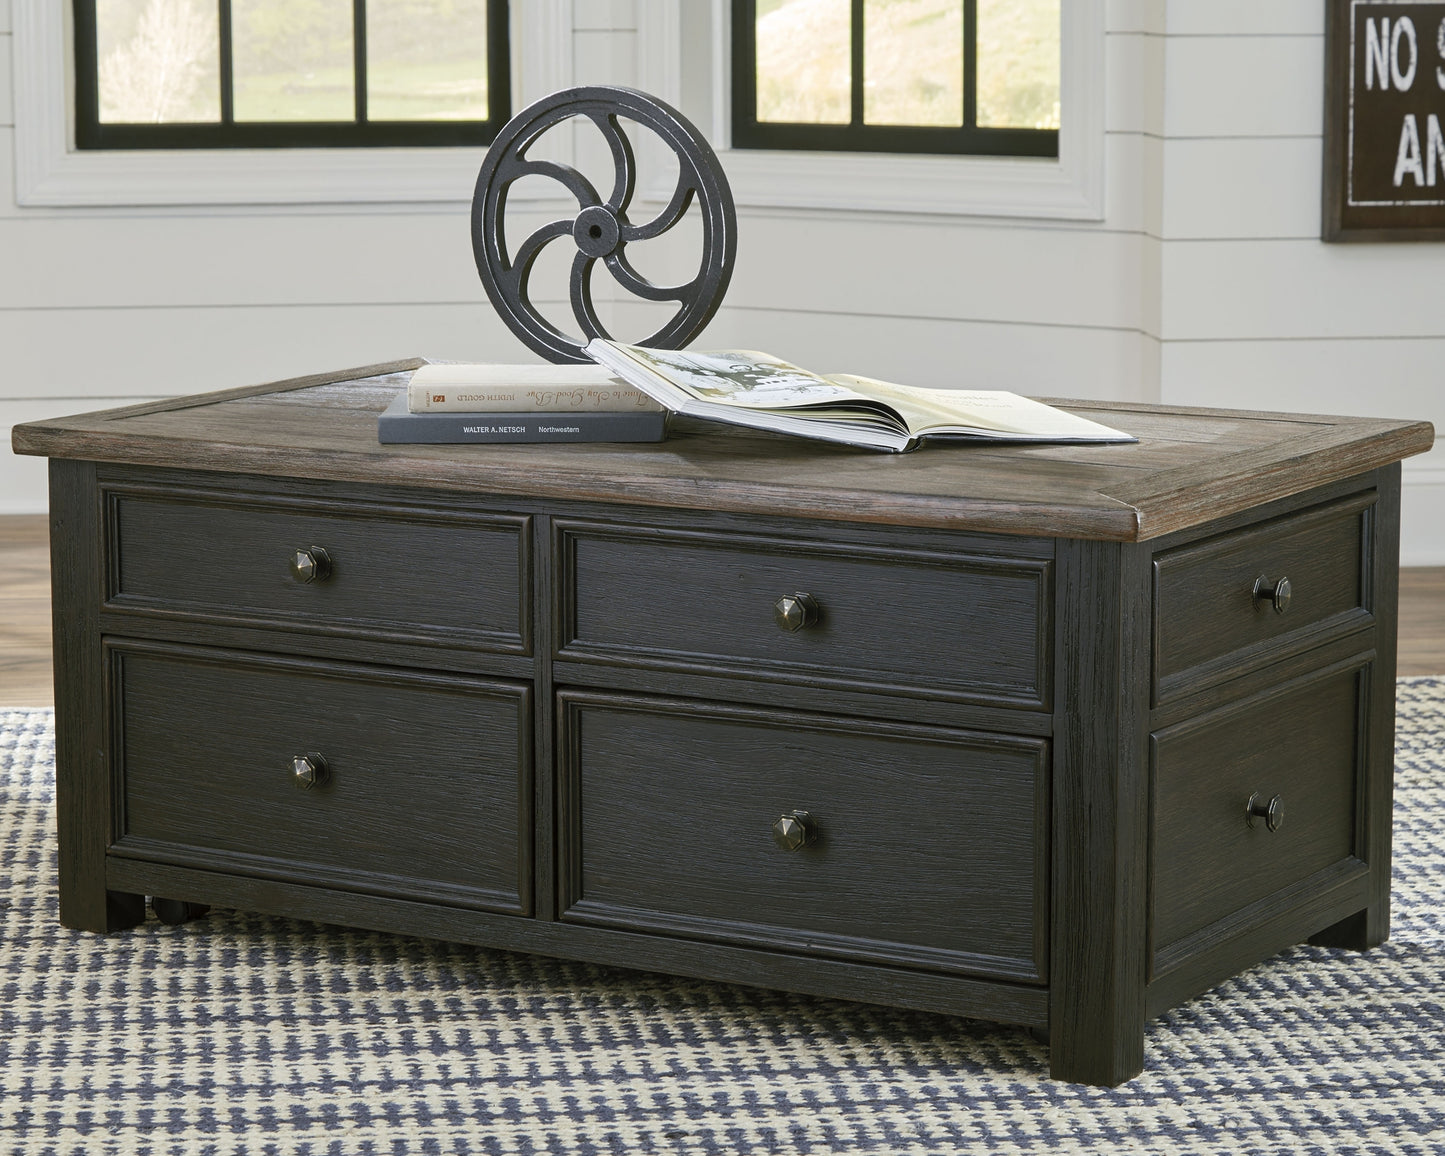 Tyler Creek Coffee Table with 2 End Tables Wilson Furniture (OH)  in Bridgeport, Ohio. Serving Moundsville, Richmond, Smithfield, Cadiz, & St. Clairesville